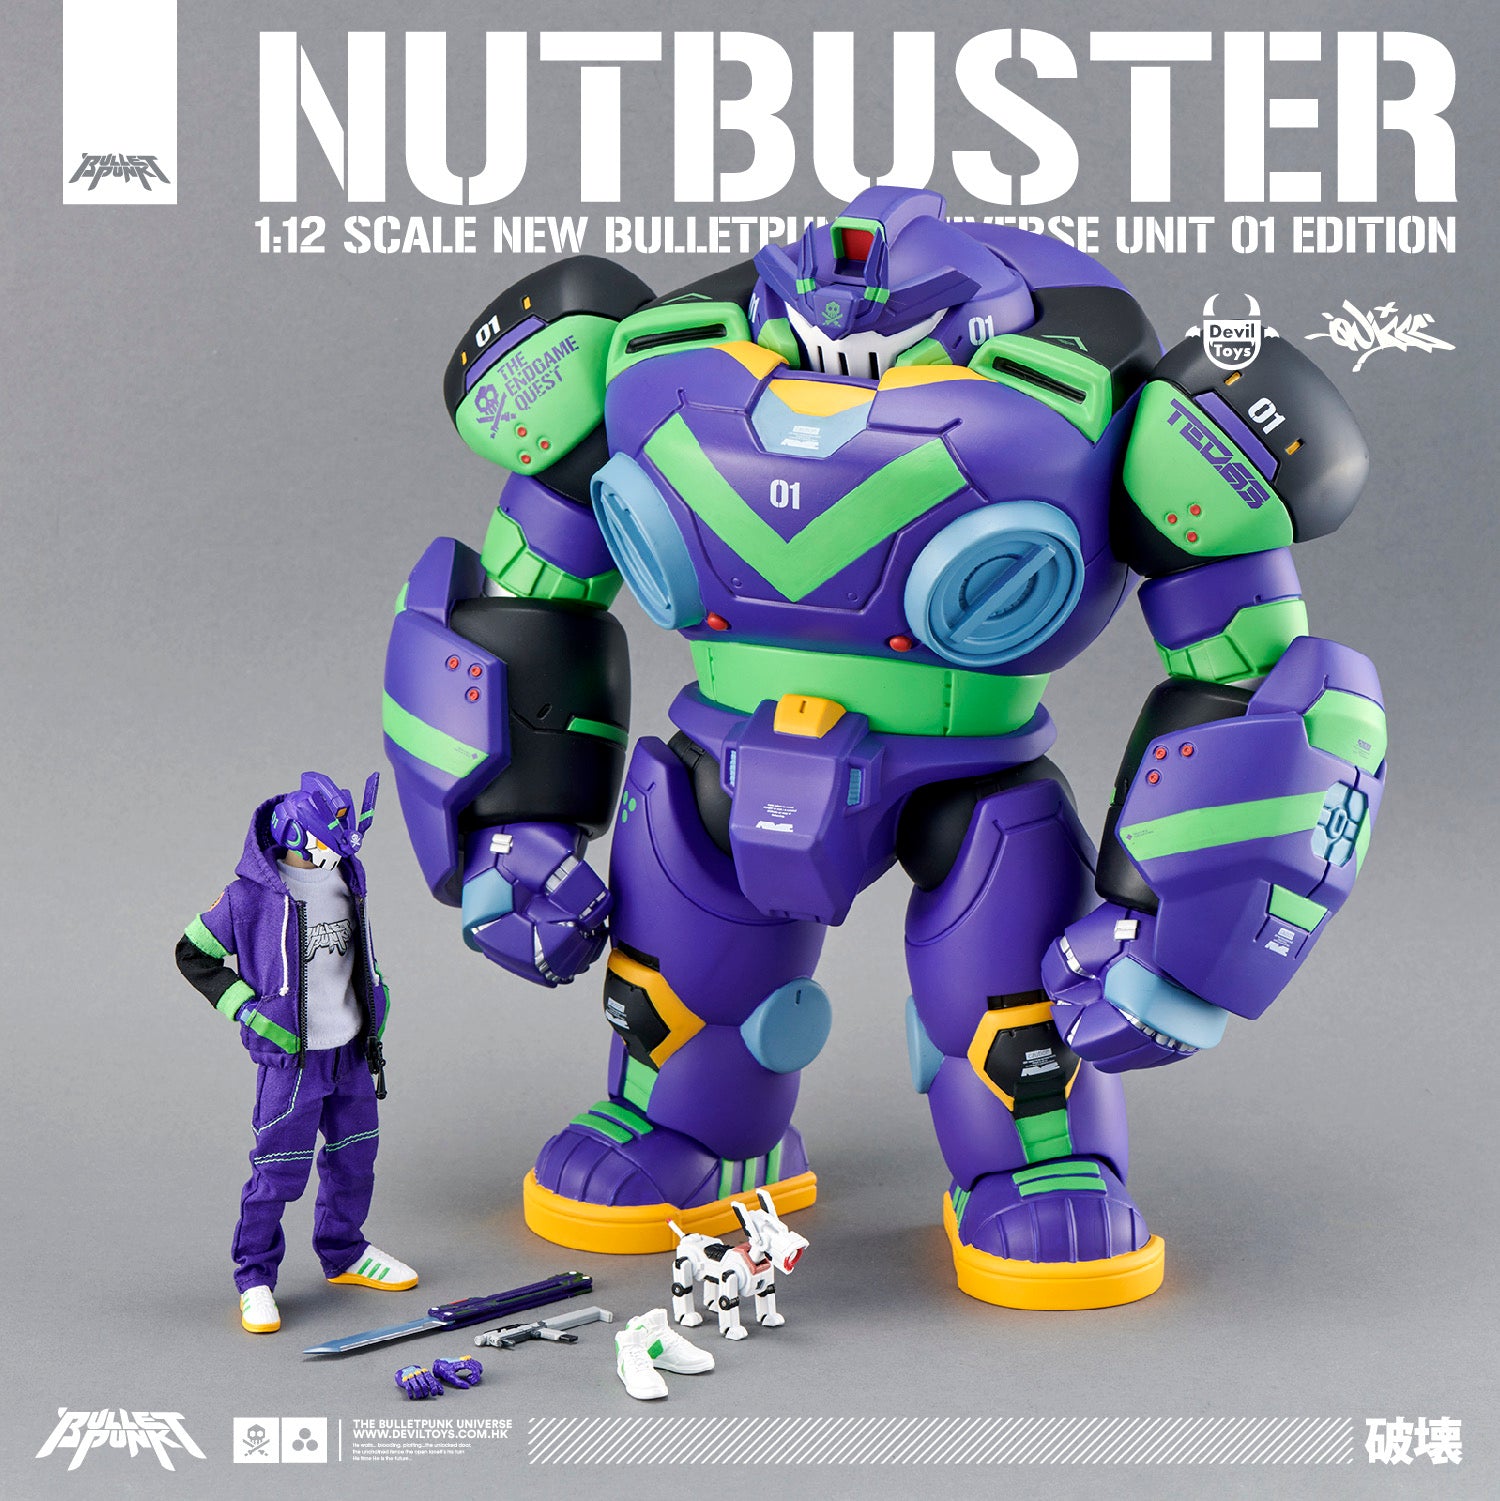 1:12 Scale NUTBUSTER + TEQ63 New "UNIT_01” Colorway Full Kit by Quiccs X Devil Toys